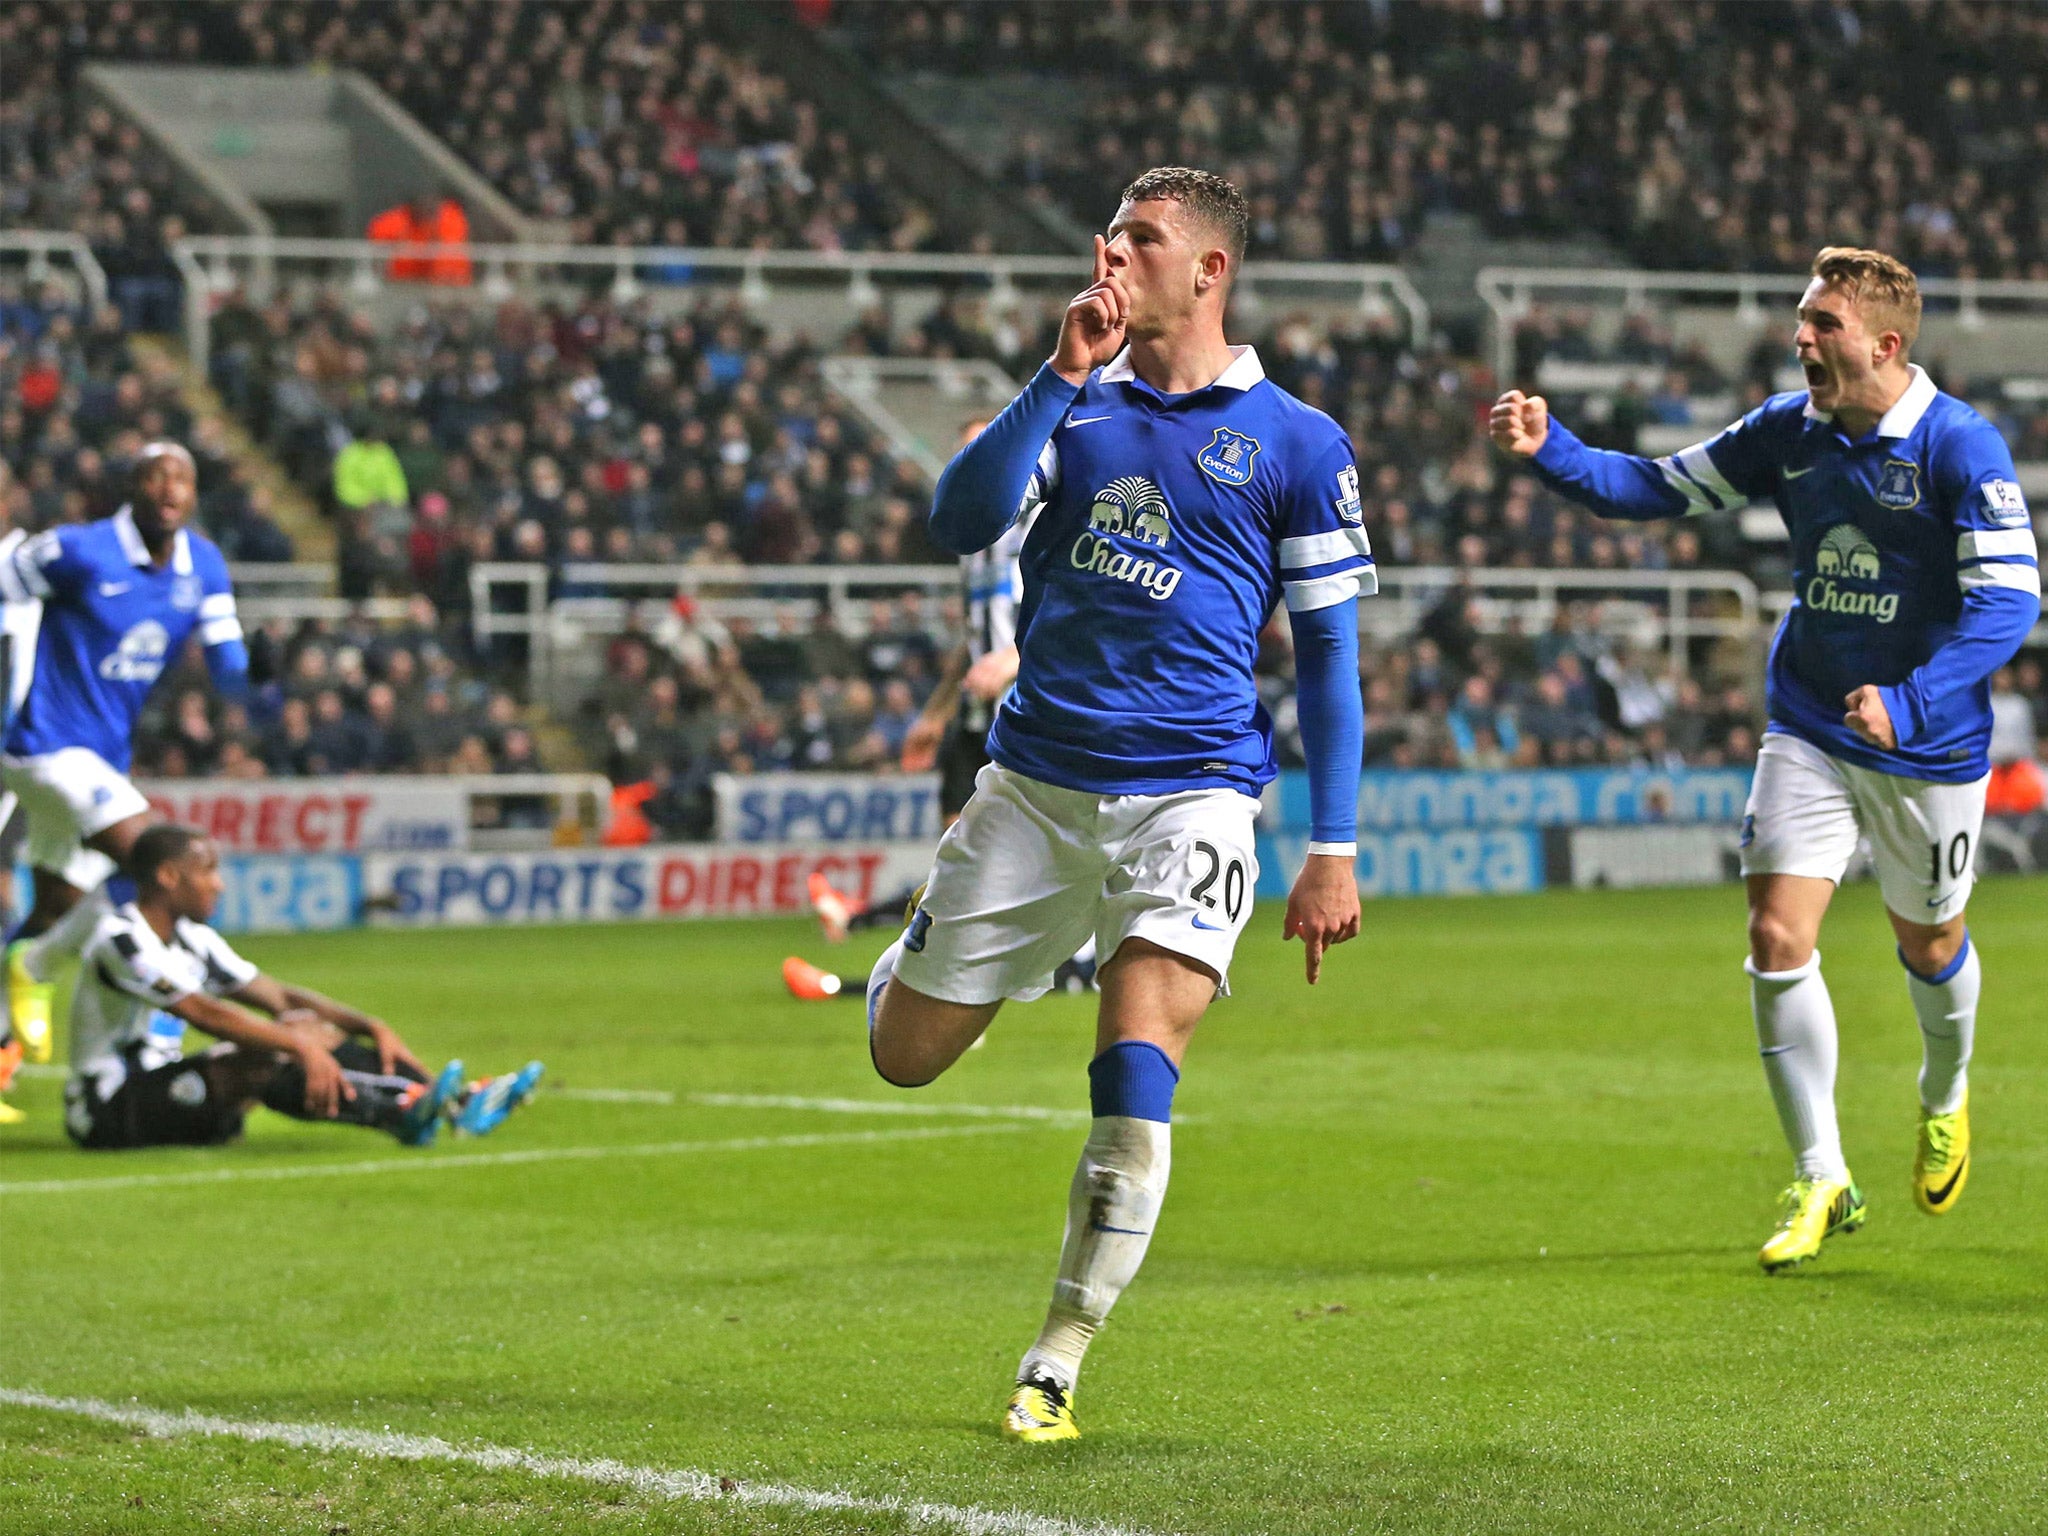 Ross Barkley silenced the Newcastle home fans after 22 minutes